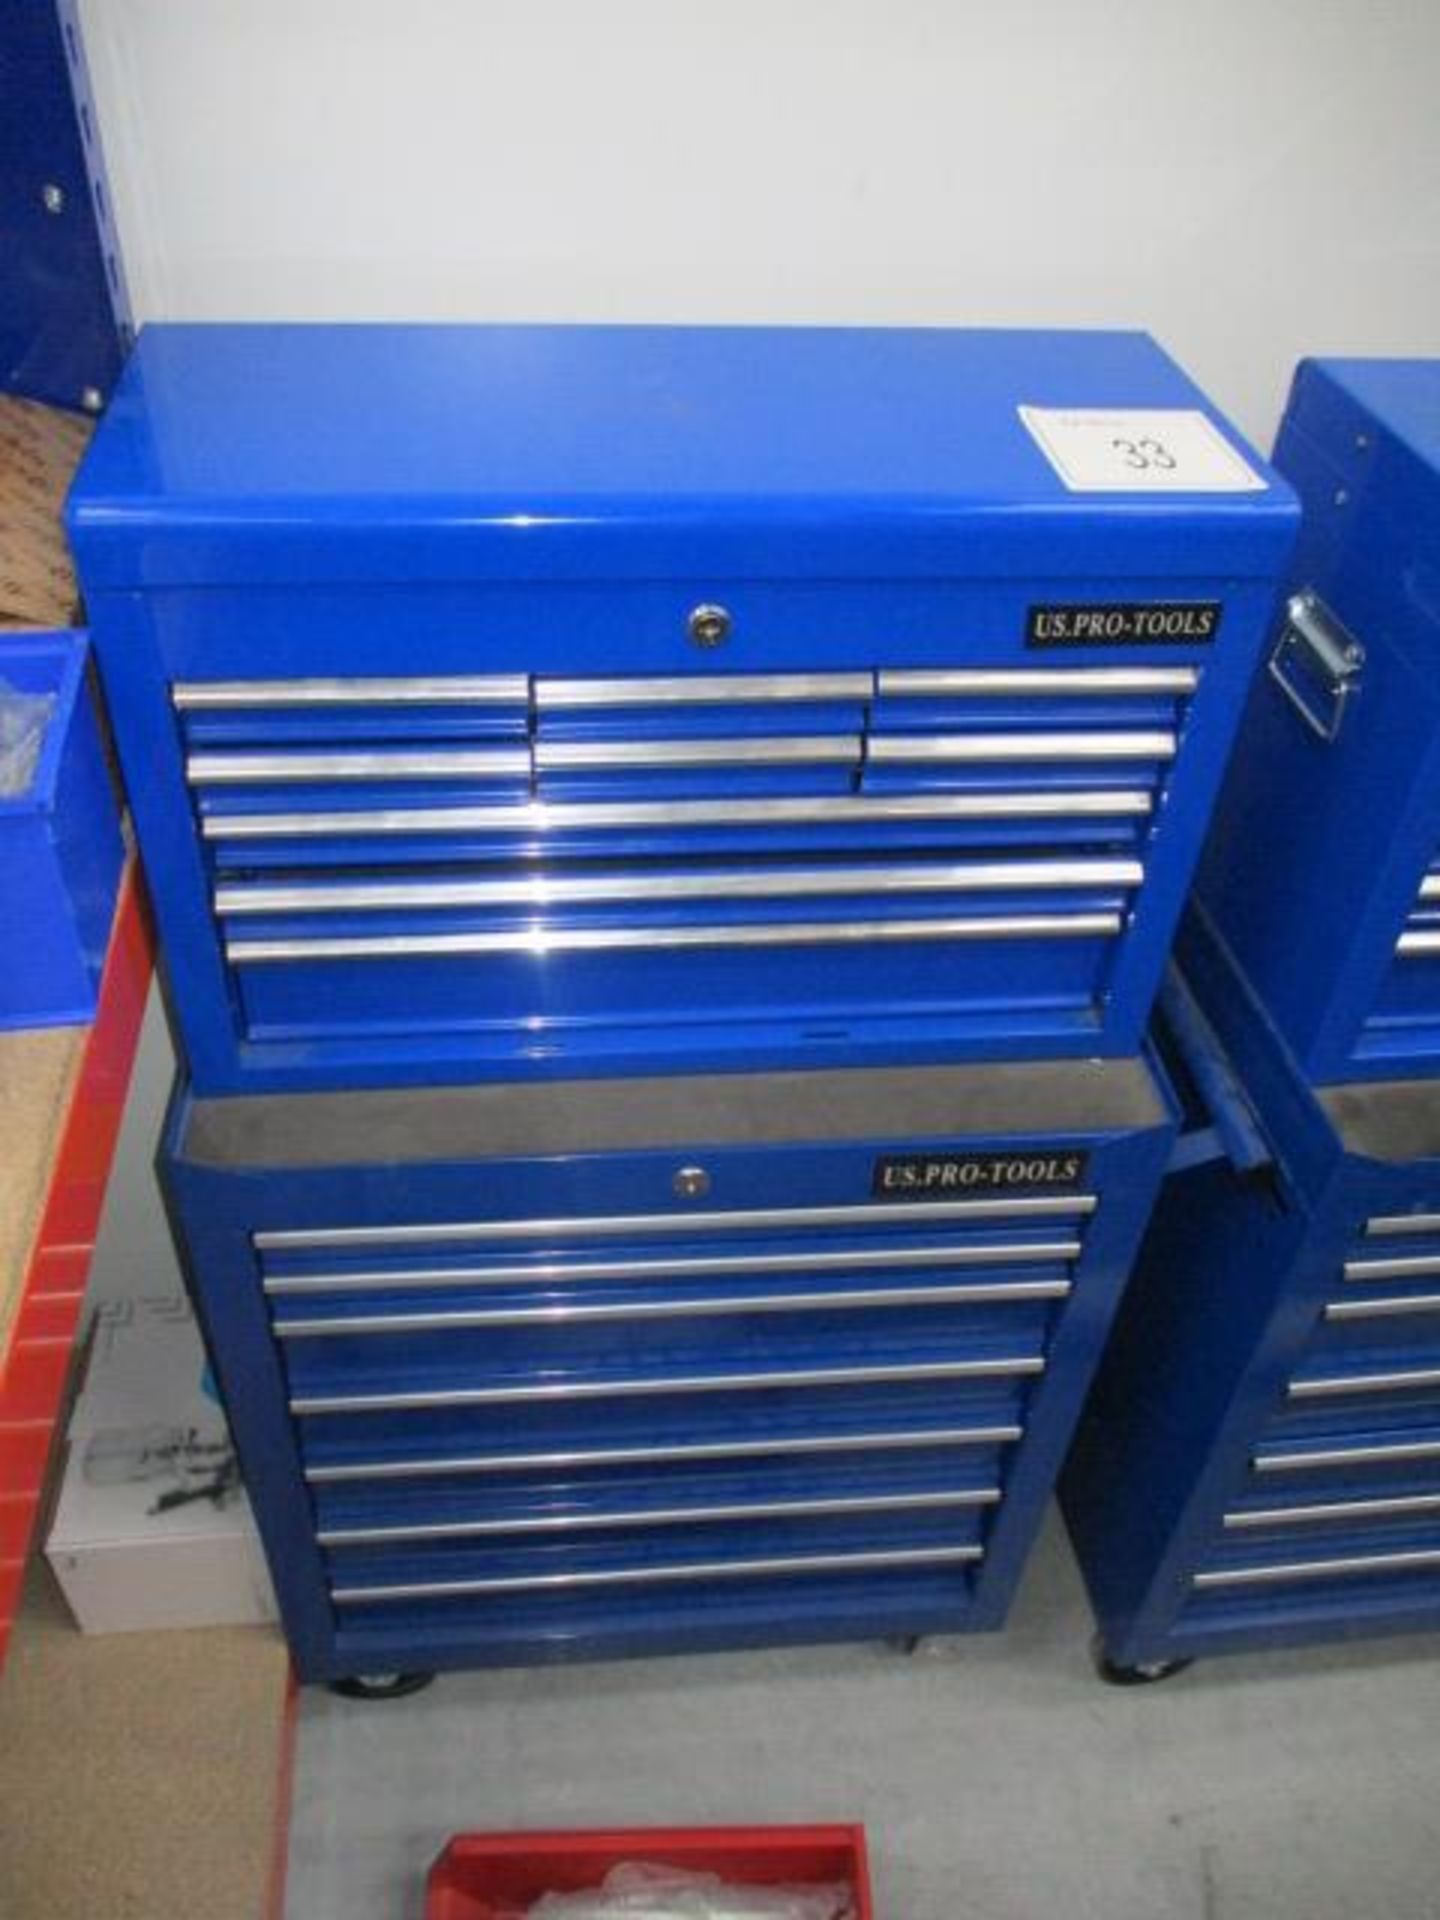 US Pro Tools Mobile Tool Chests